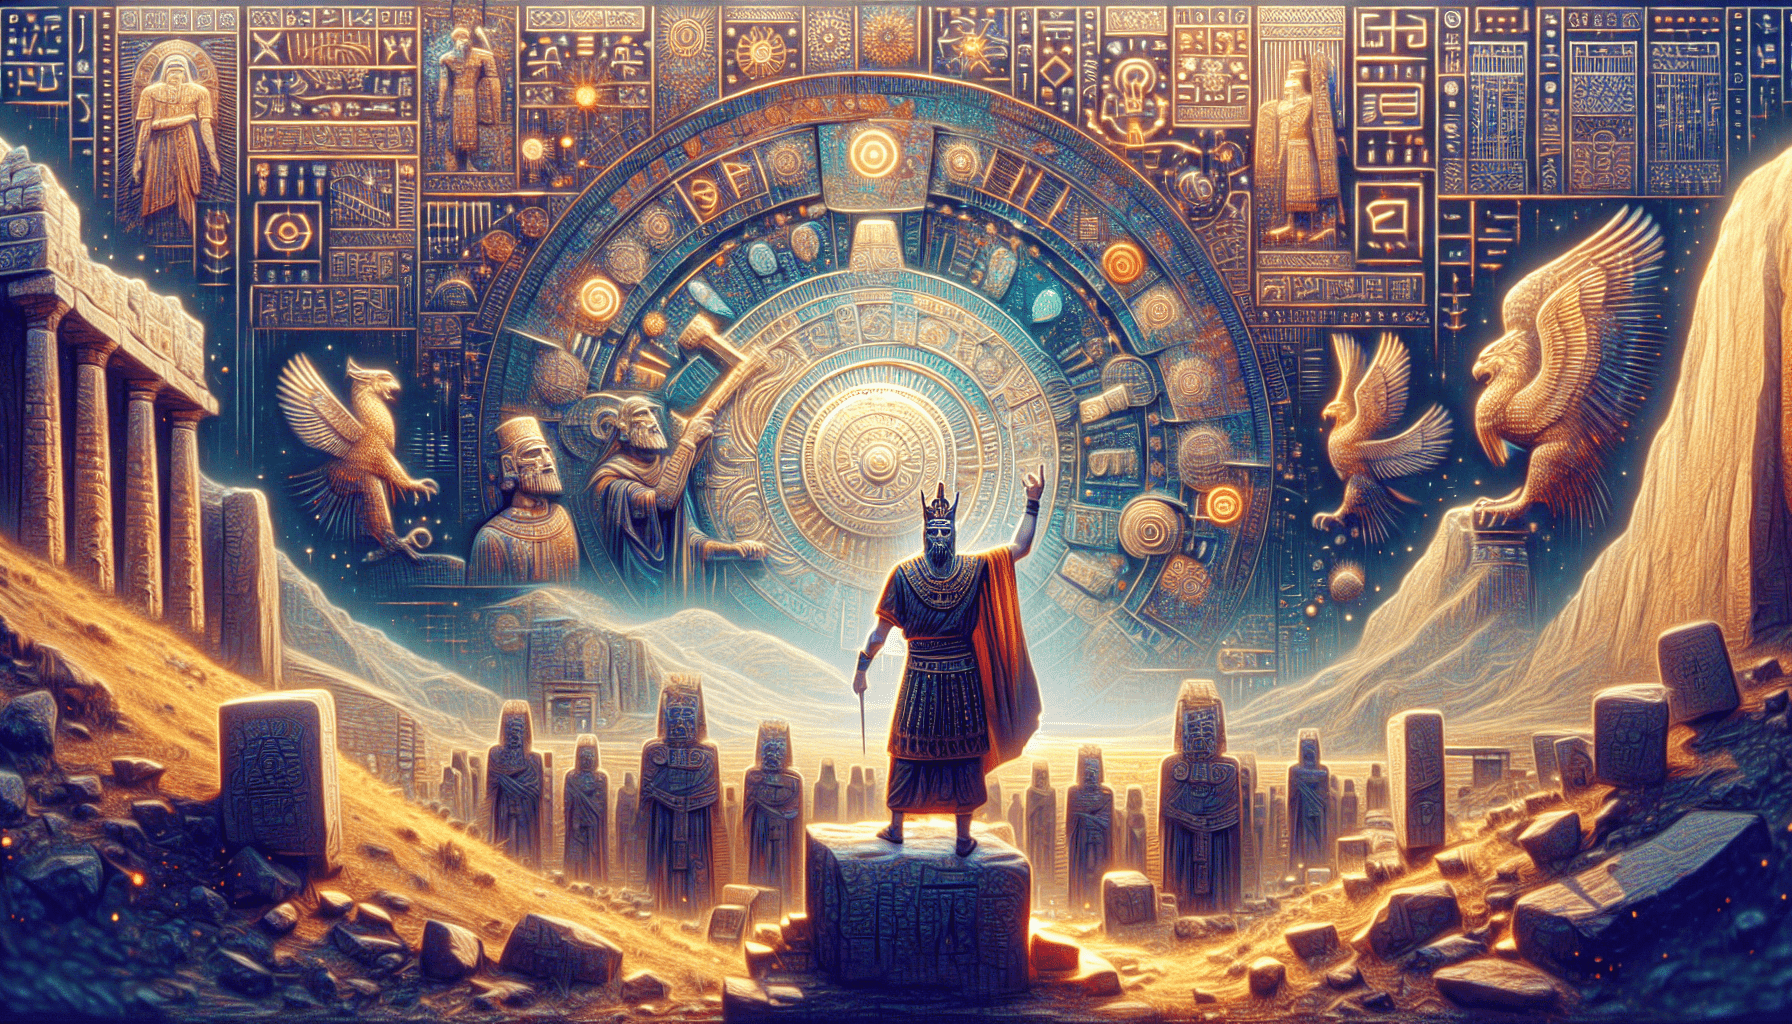 A mystical digital artwork featuring a warrior in ancient armor standing before a grand, cosmic clock surrounded by mythical figures and celestial motifs.